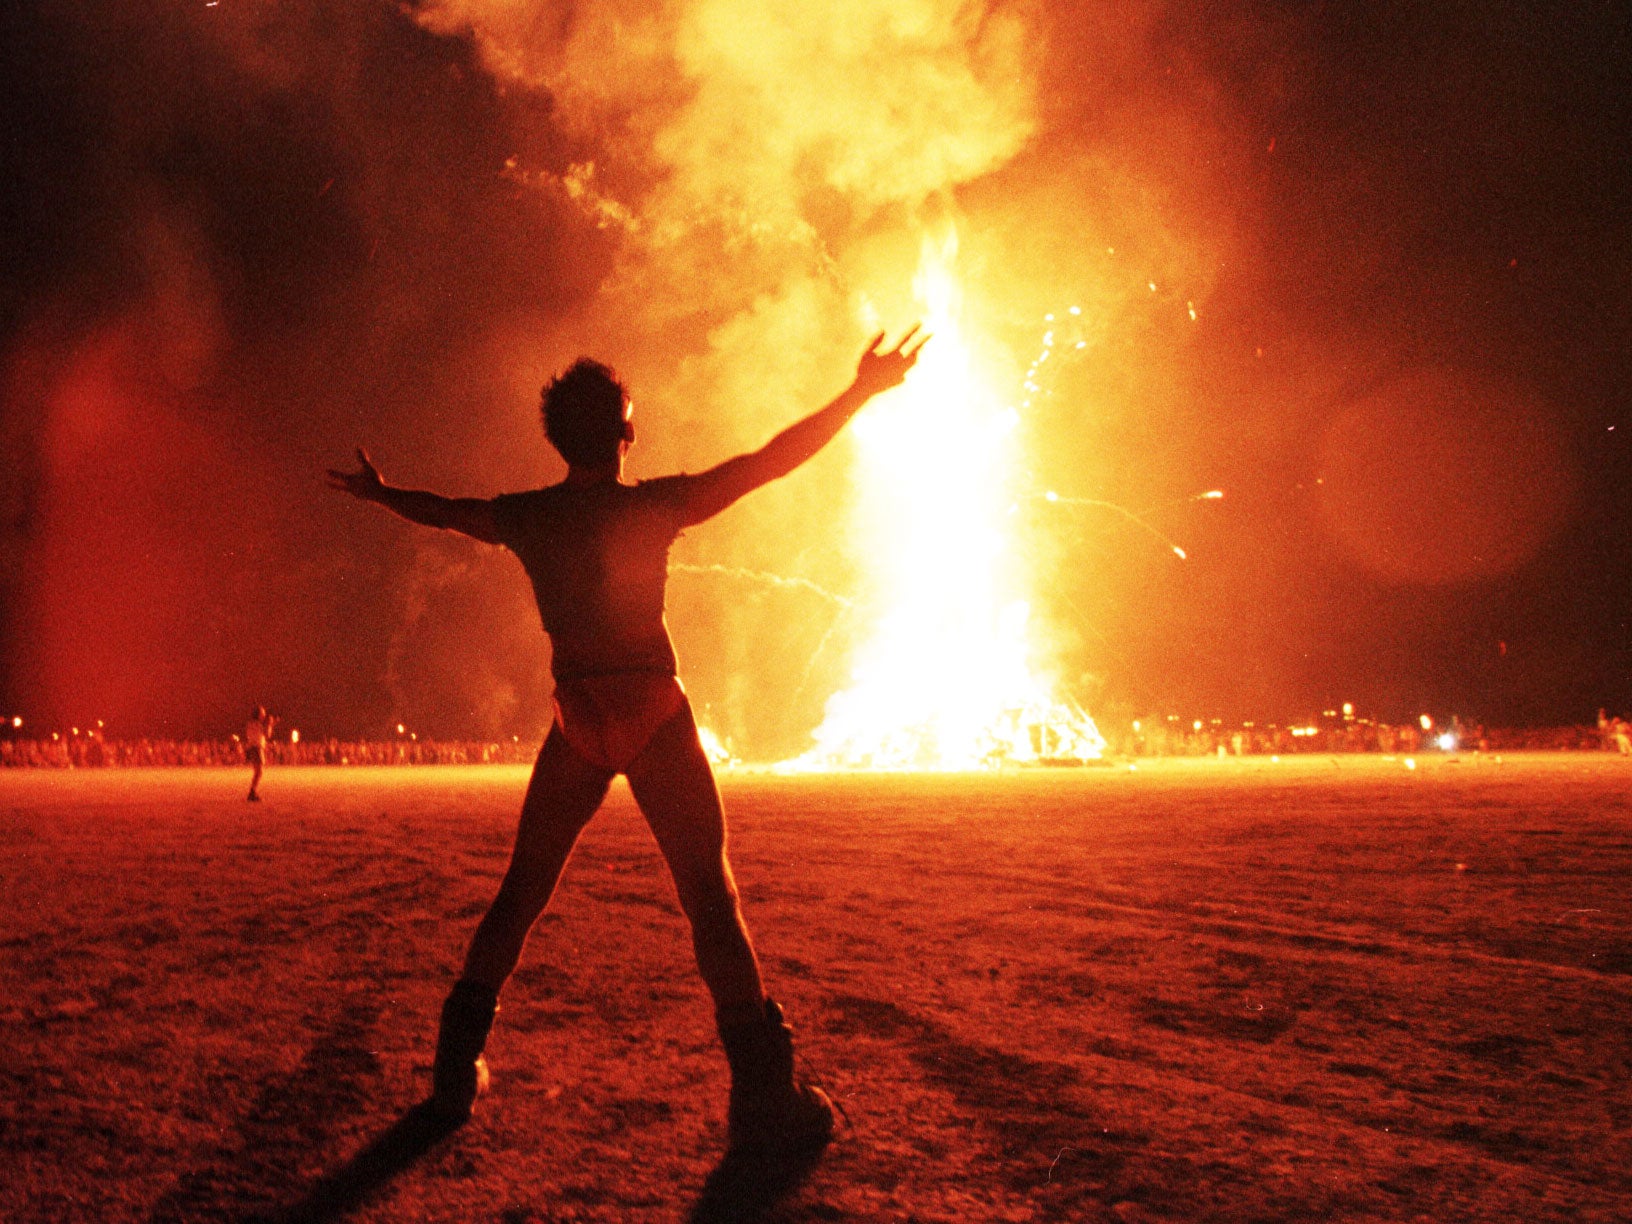 A burner watches as the Burning Man festival culminates with the burning of a giant wooden effigy